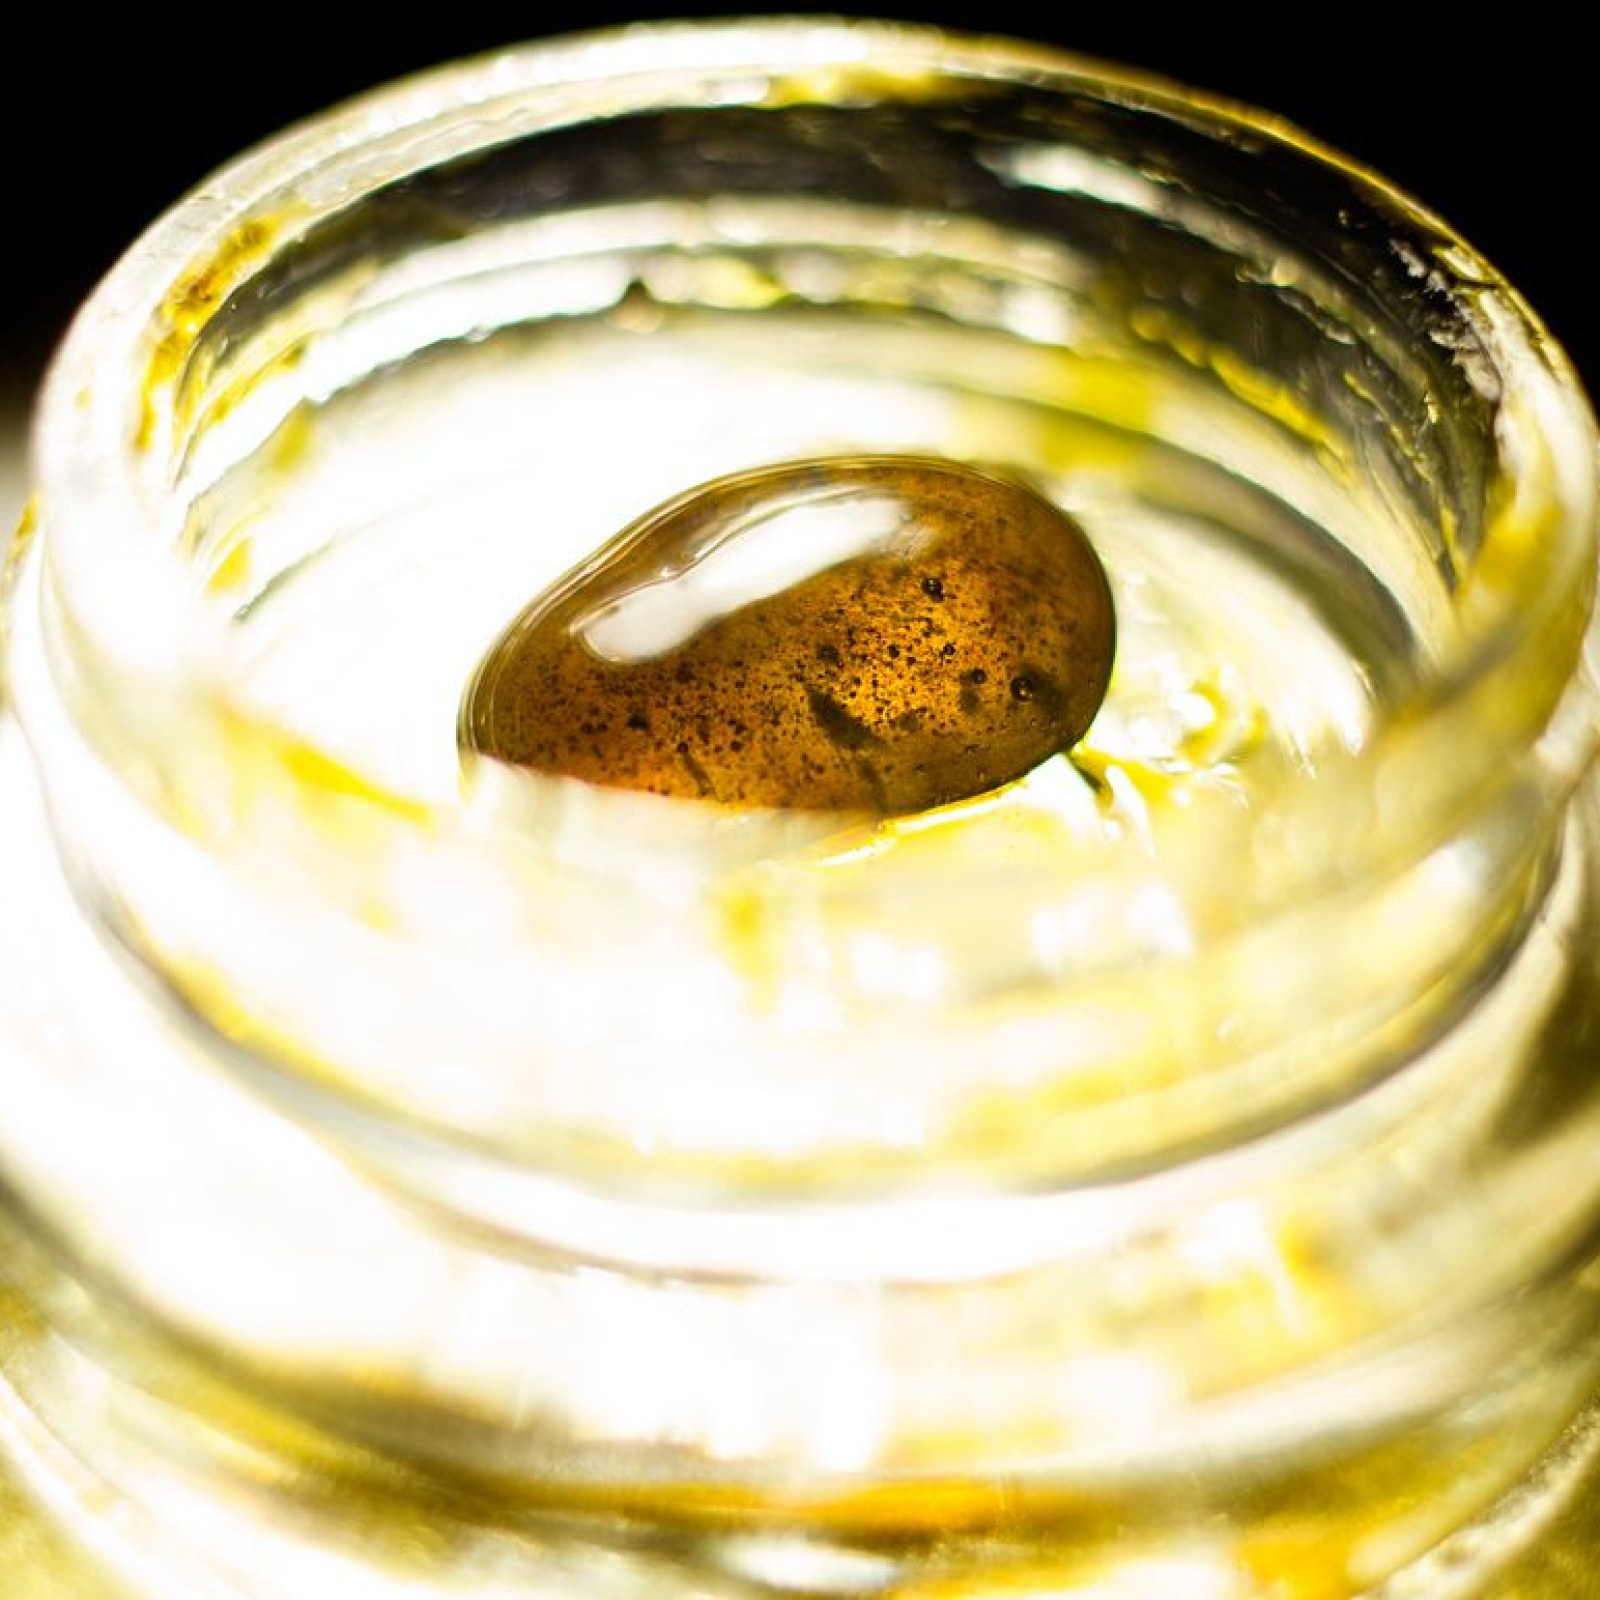 Dabs, A Marijuana Concentrate, Is Becoming More Popular: But Is It